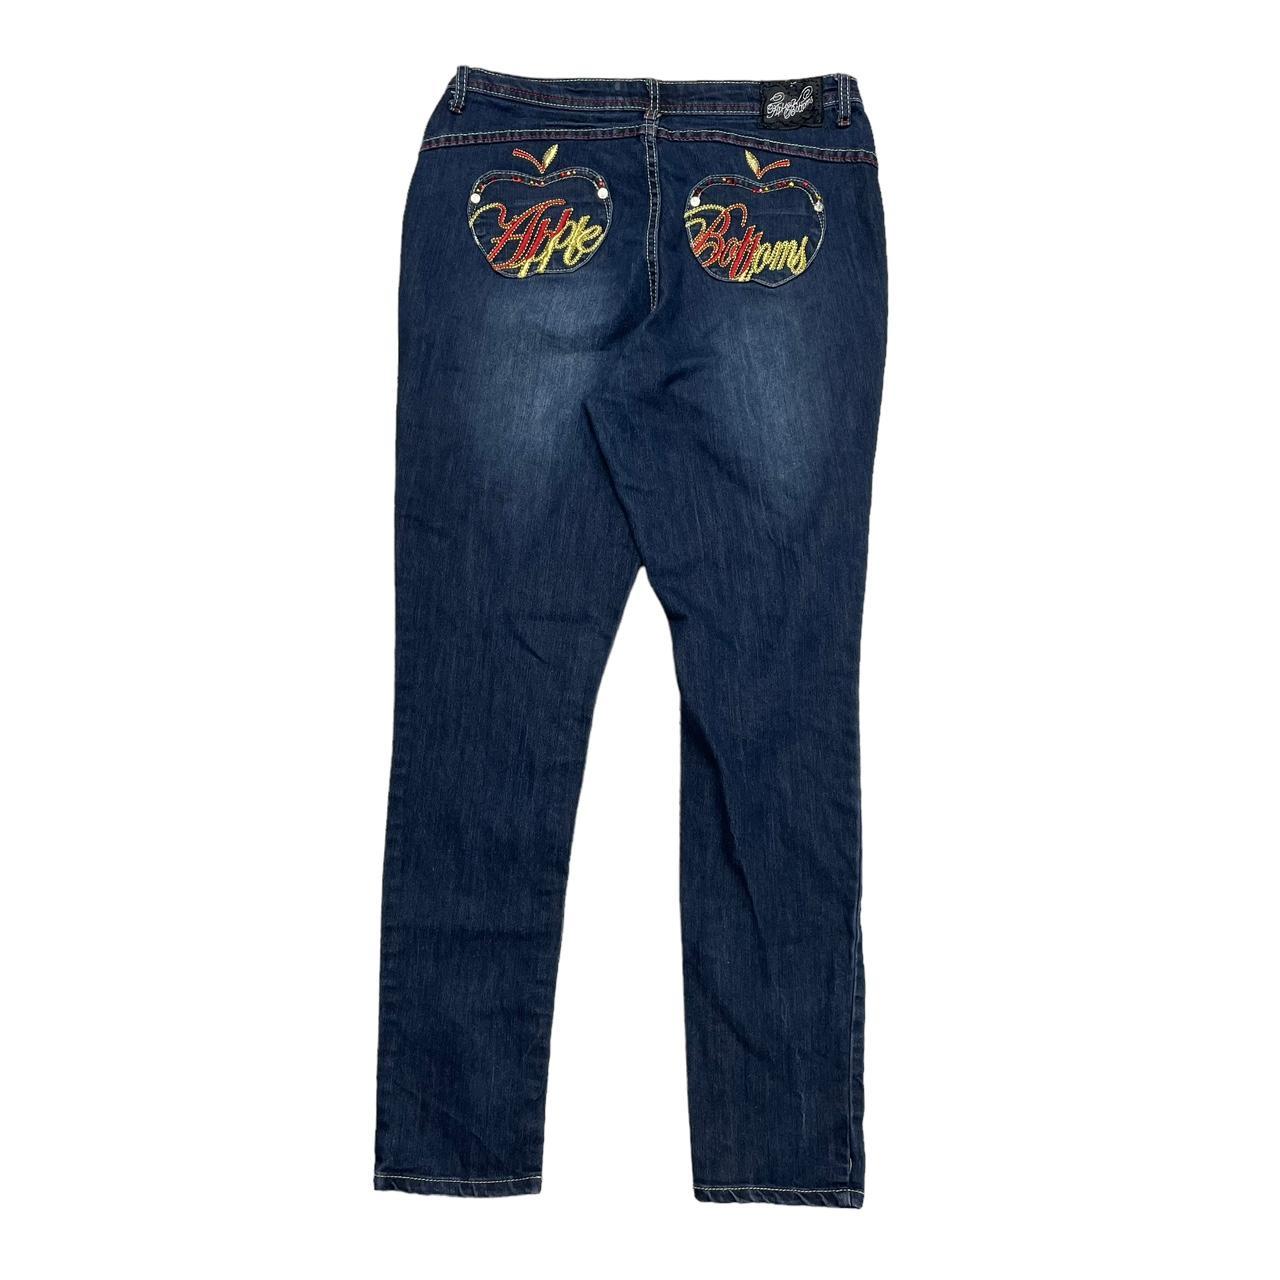 Apple Bottoms Women's Blue and Navy Jeans (3)